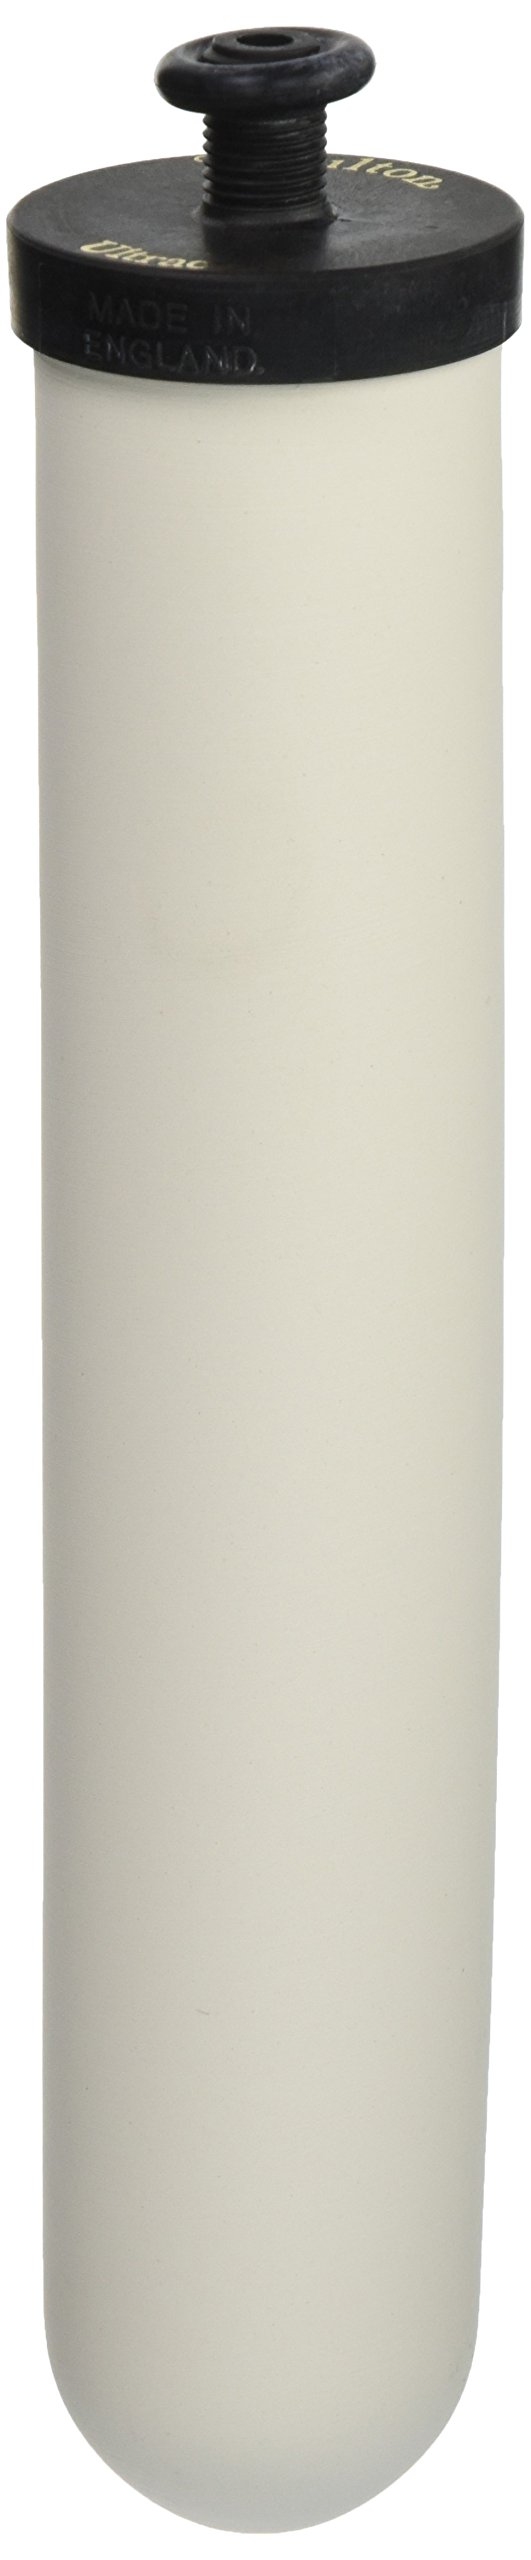 Doulton Ultracarb 10 Water Filter Candle, (W9123053) by Doulton